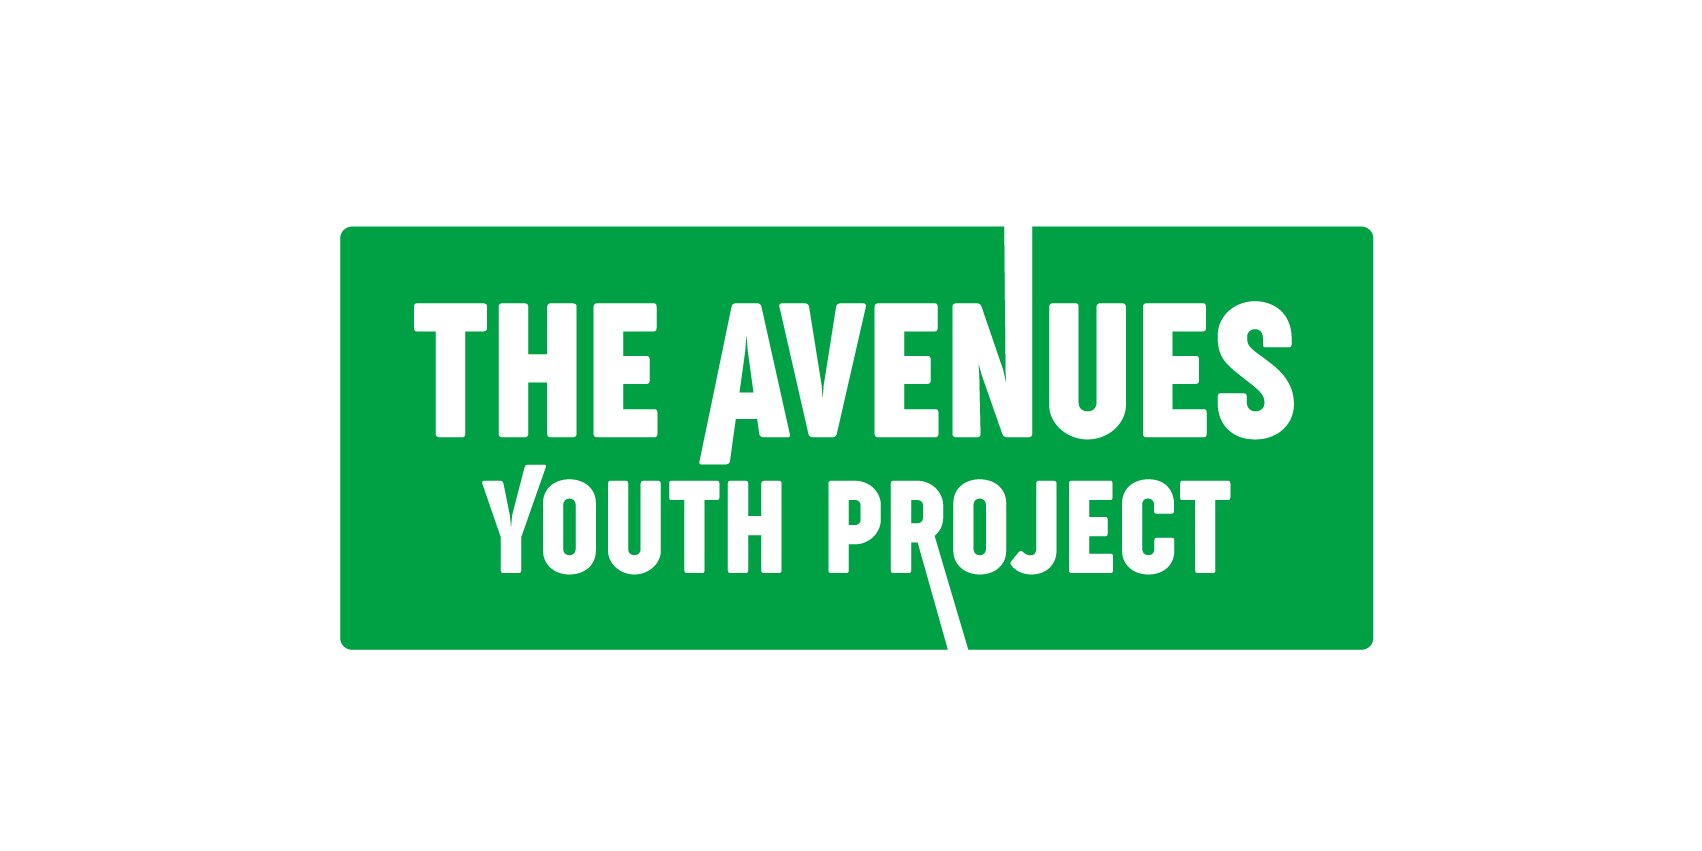 The Avenues Youth Project logo